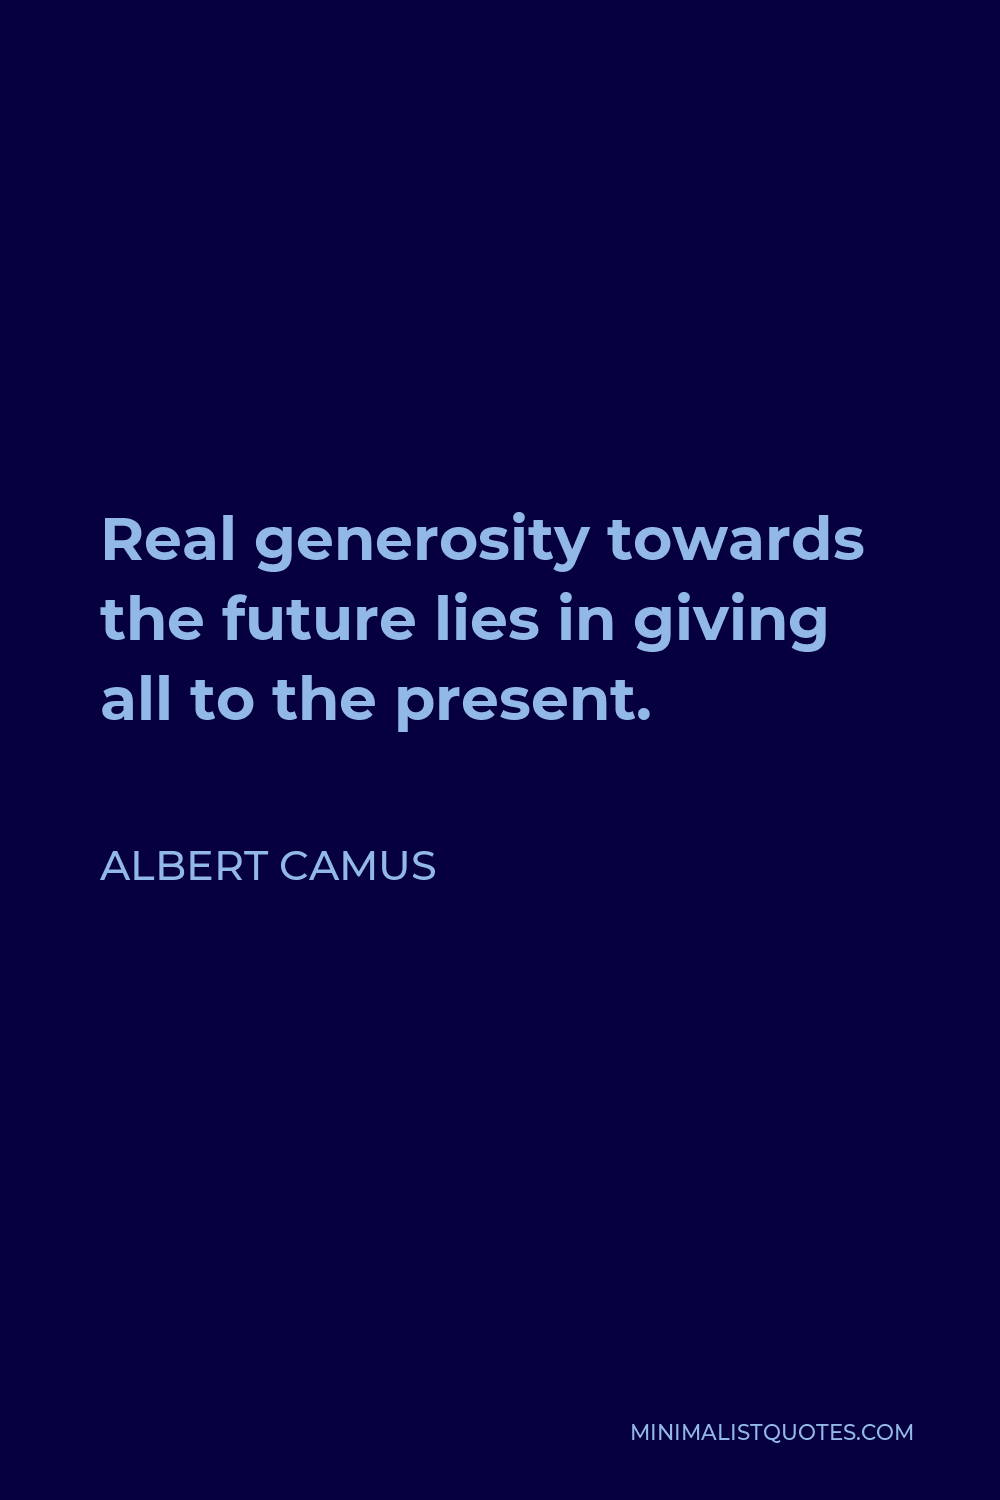 Albert Camus Quote - Real generosity towards the future lies in giving all to the present.